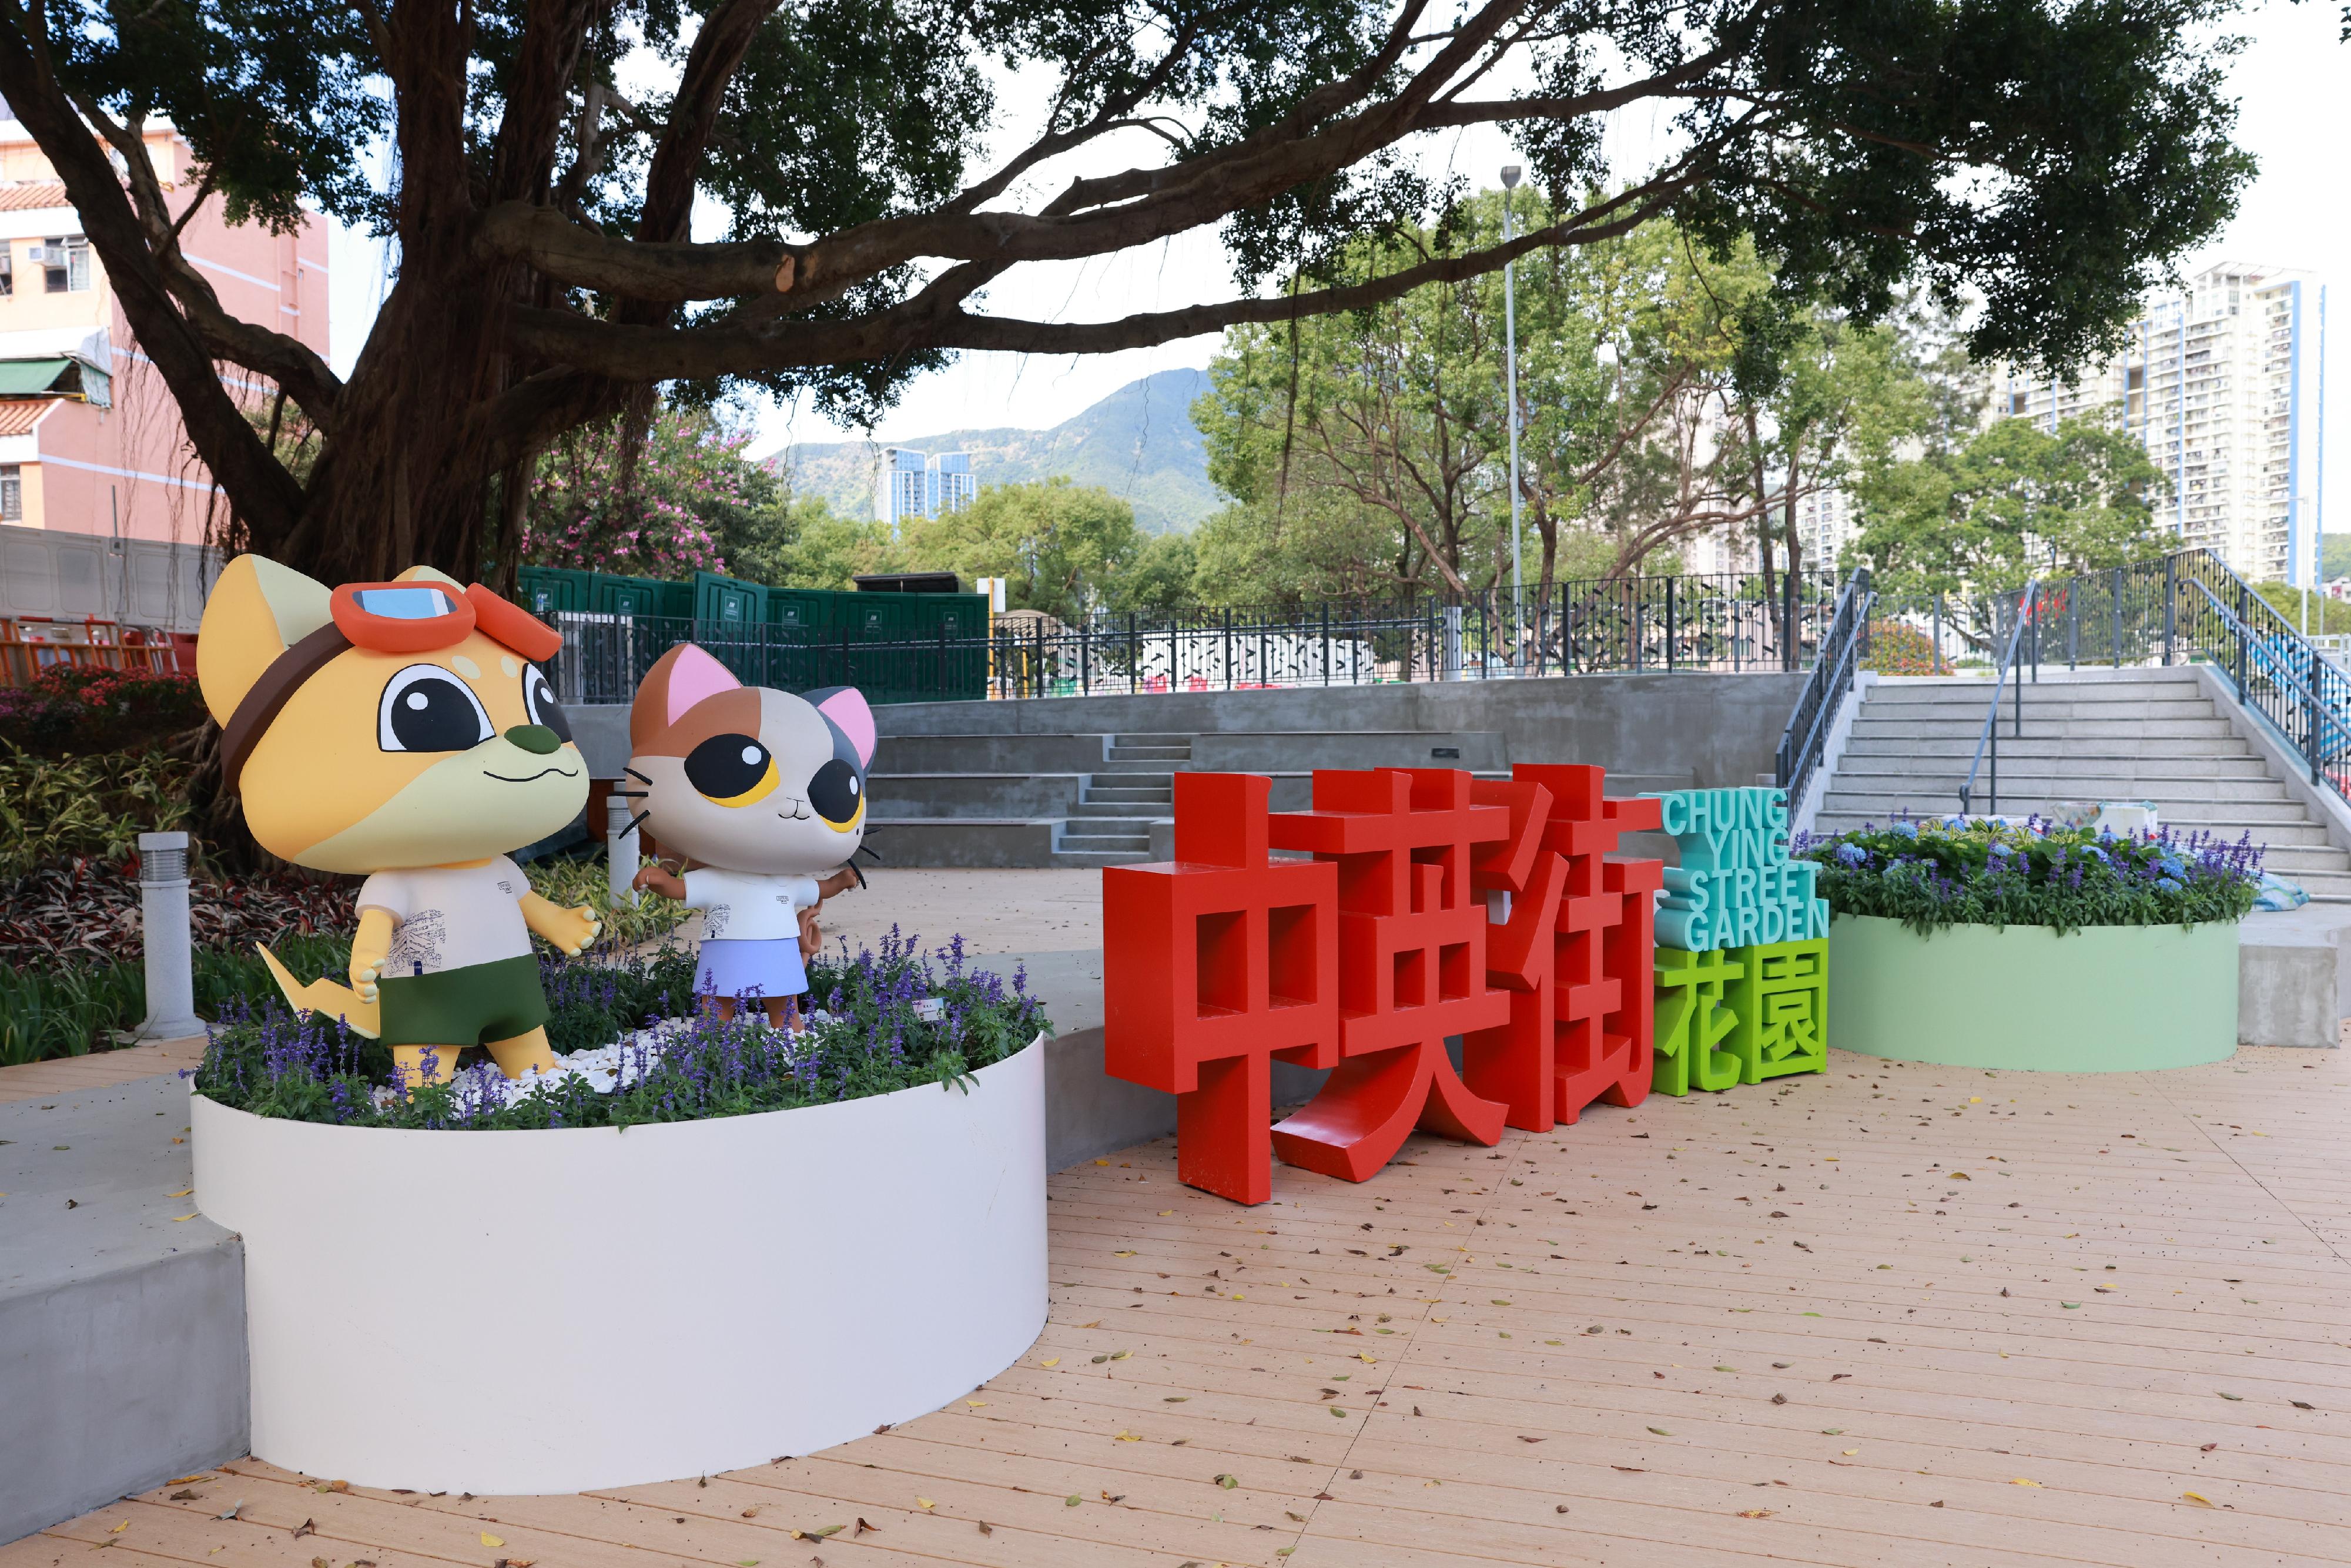 The Second Phase Opening-up of Sha Tau Kok will begin on January 1 next year. Initially, up to 1 000 tourists per day will be allowed to visit all parts of Sha Tau Kok, except Chung Ying Street, after applying online for a Closed Area Permit. Photo shows the Chung Ying Street Garden situated in front of the Chung Ying Street Checkpoint.